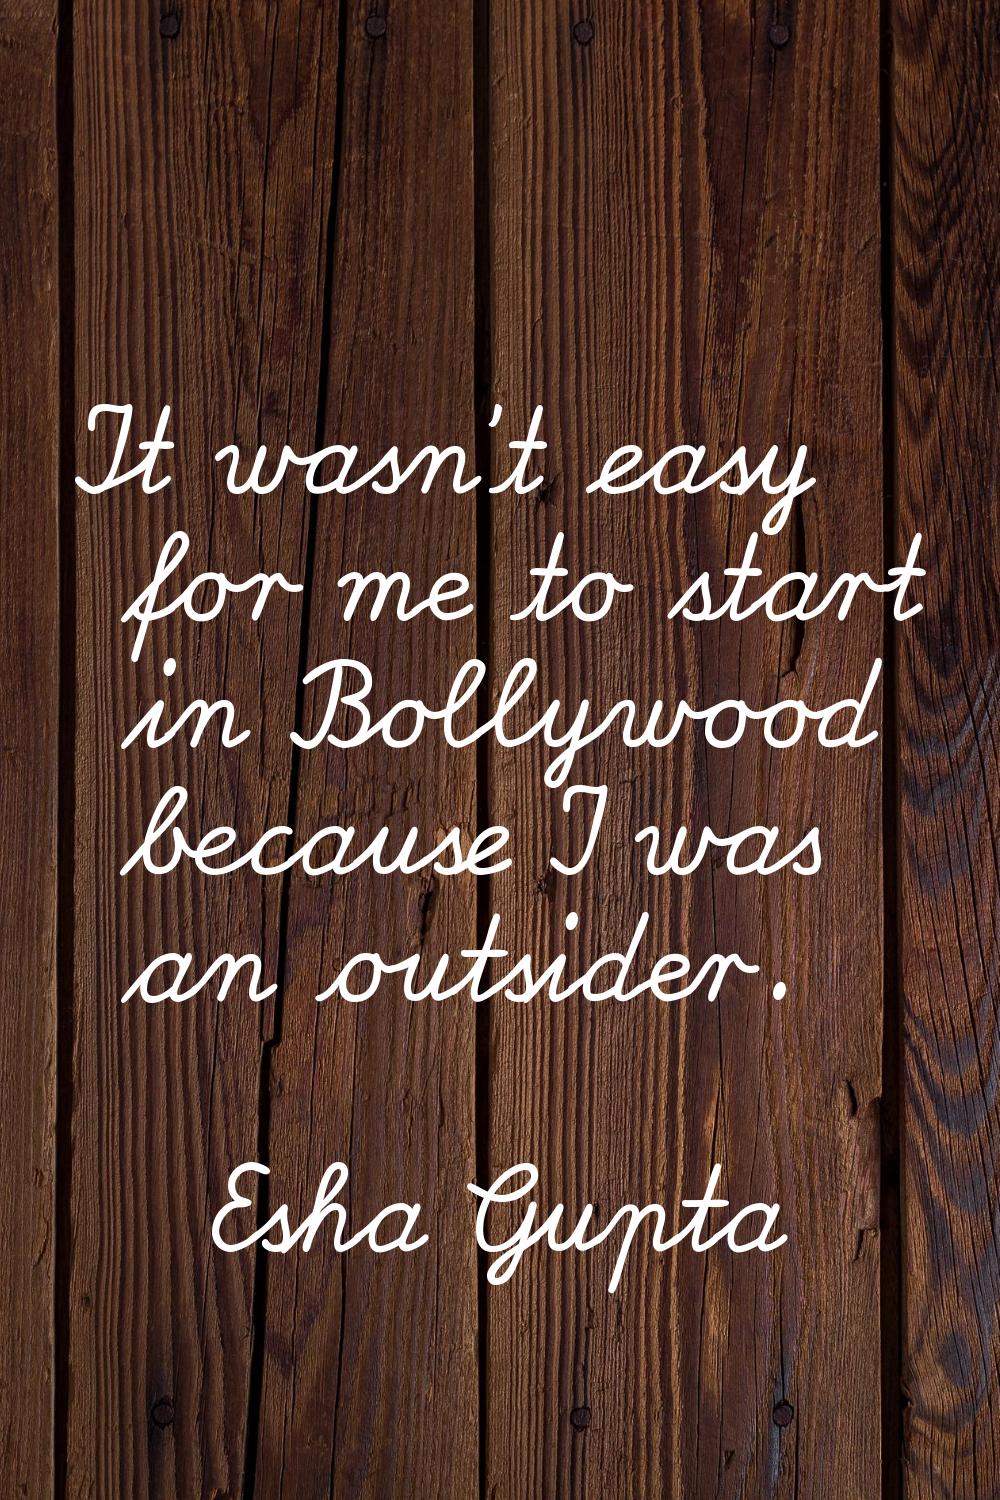 It wasn't easy for me to start in Bollywood because I was an outsider.